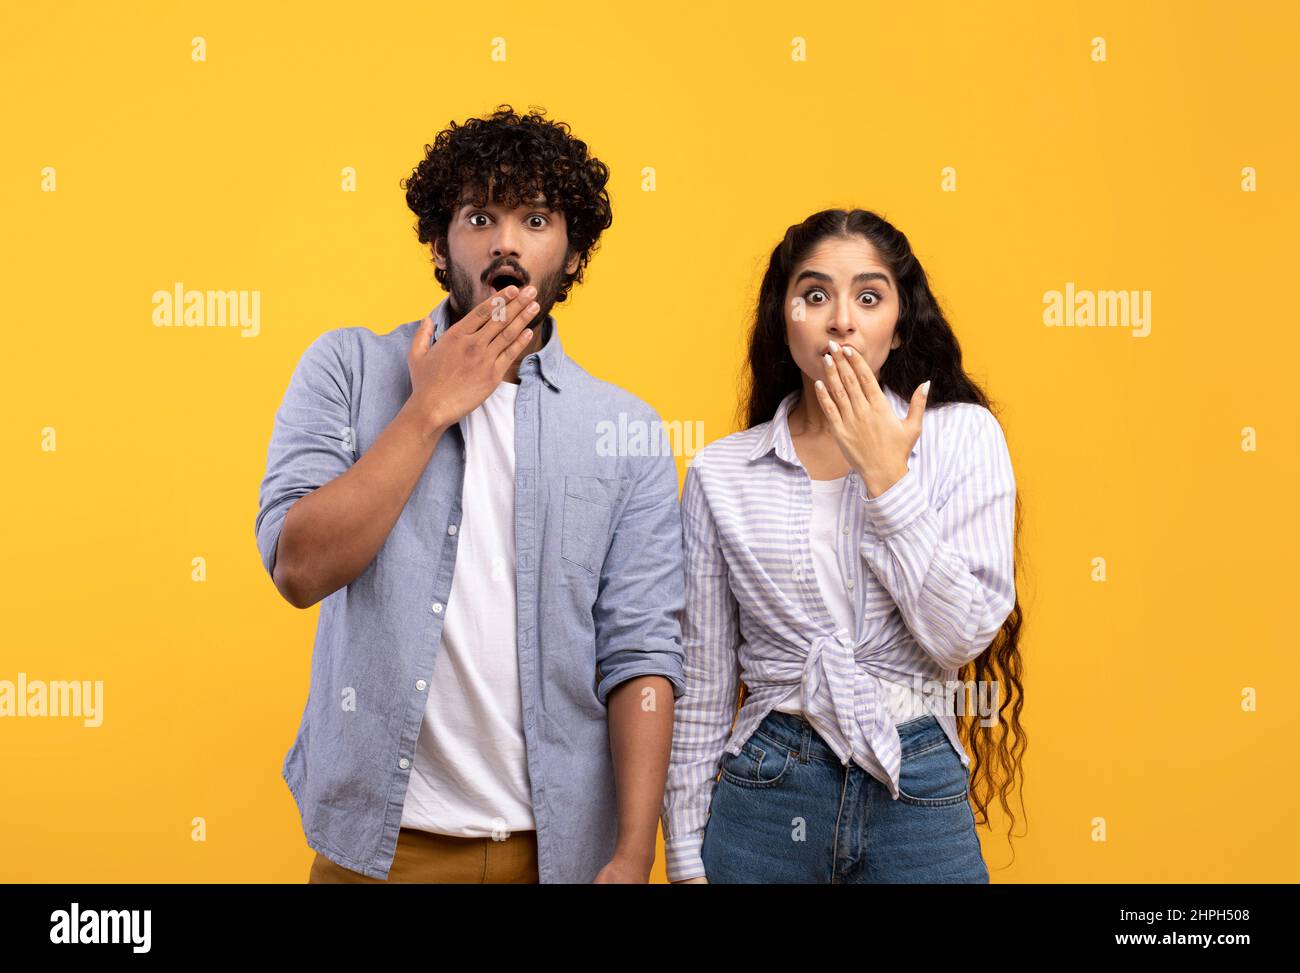 Shocking news, unexpected events. Young indian female and man with wide open eyes, covering mouth with hand Stock Photo